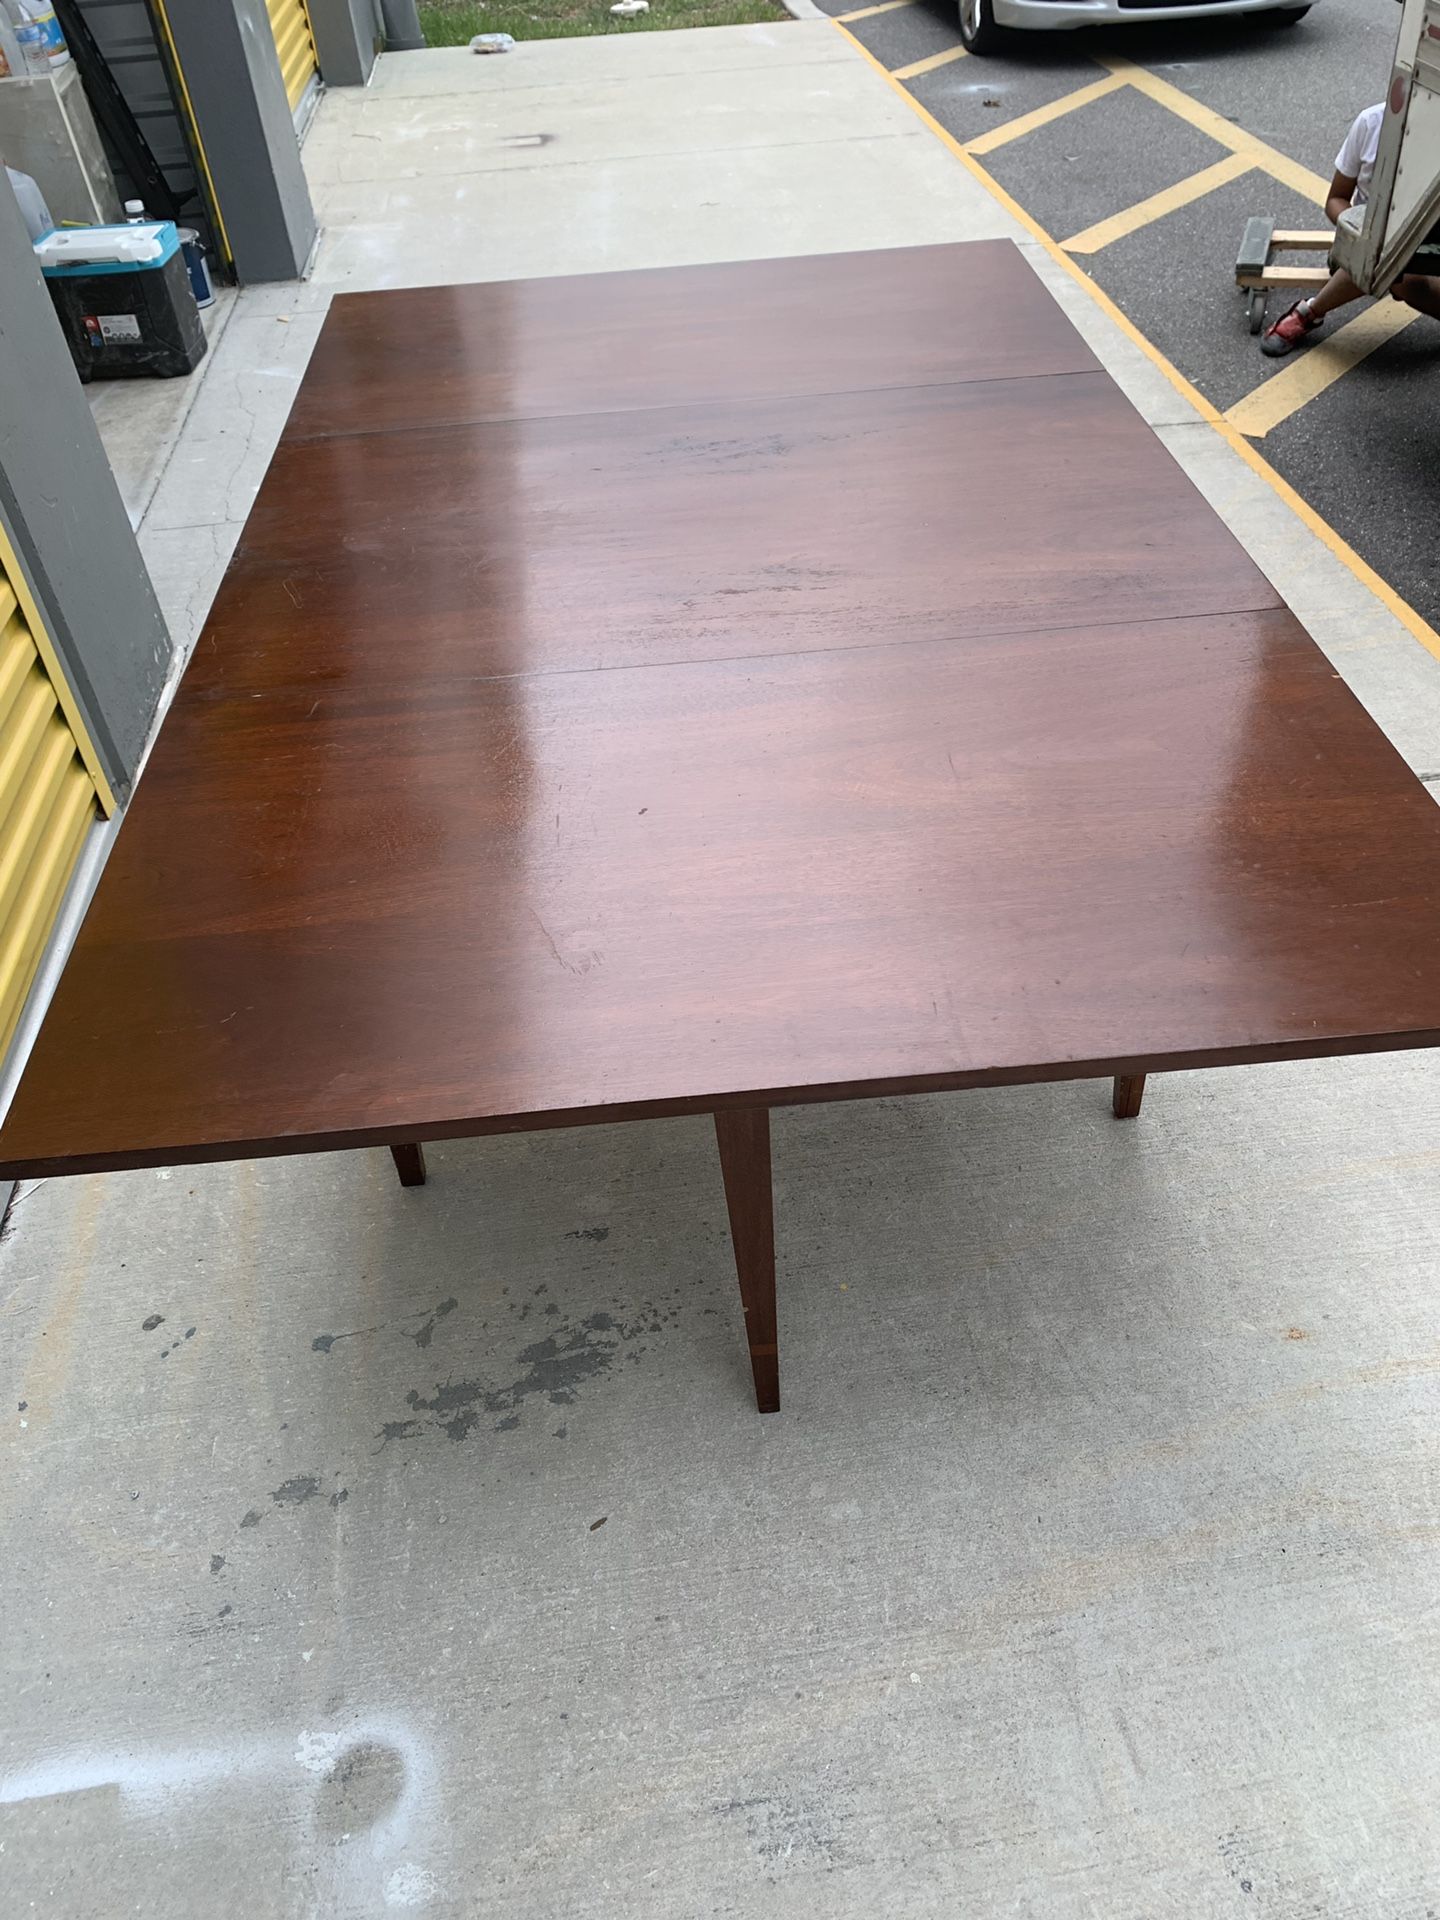 All wood antique dining table can be used for many different projects